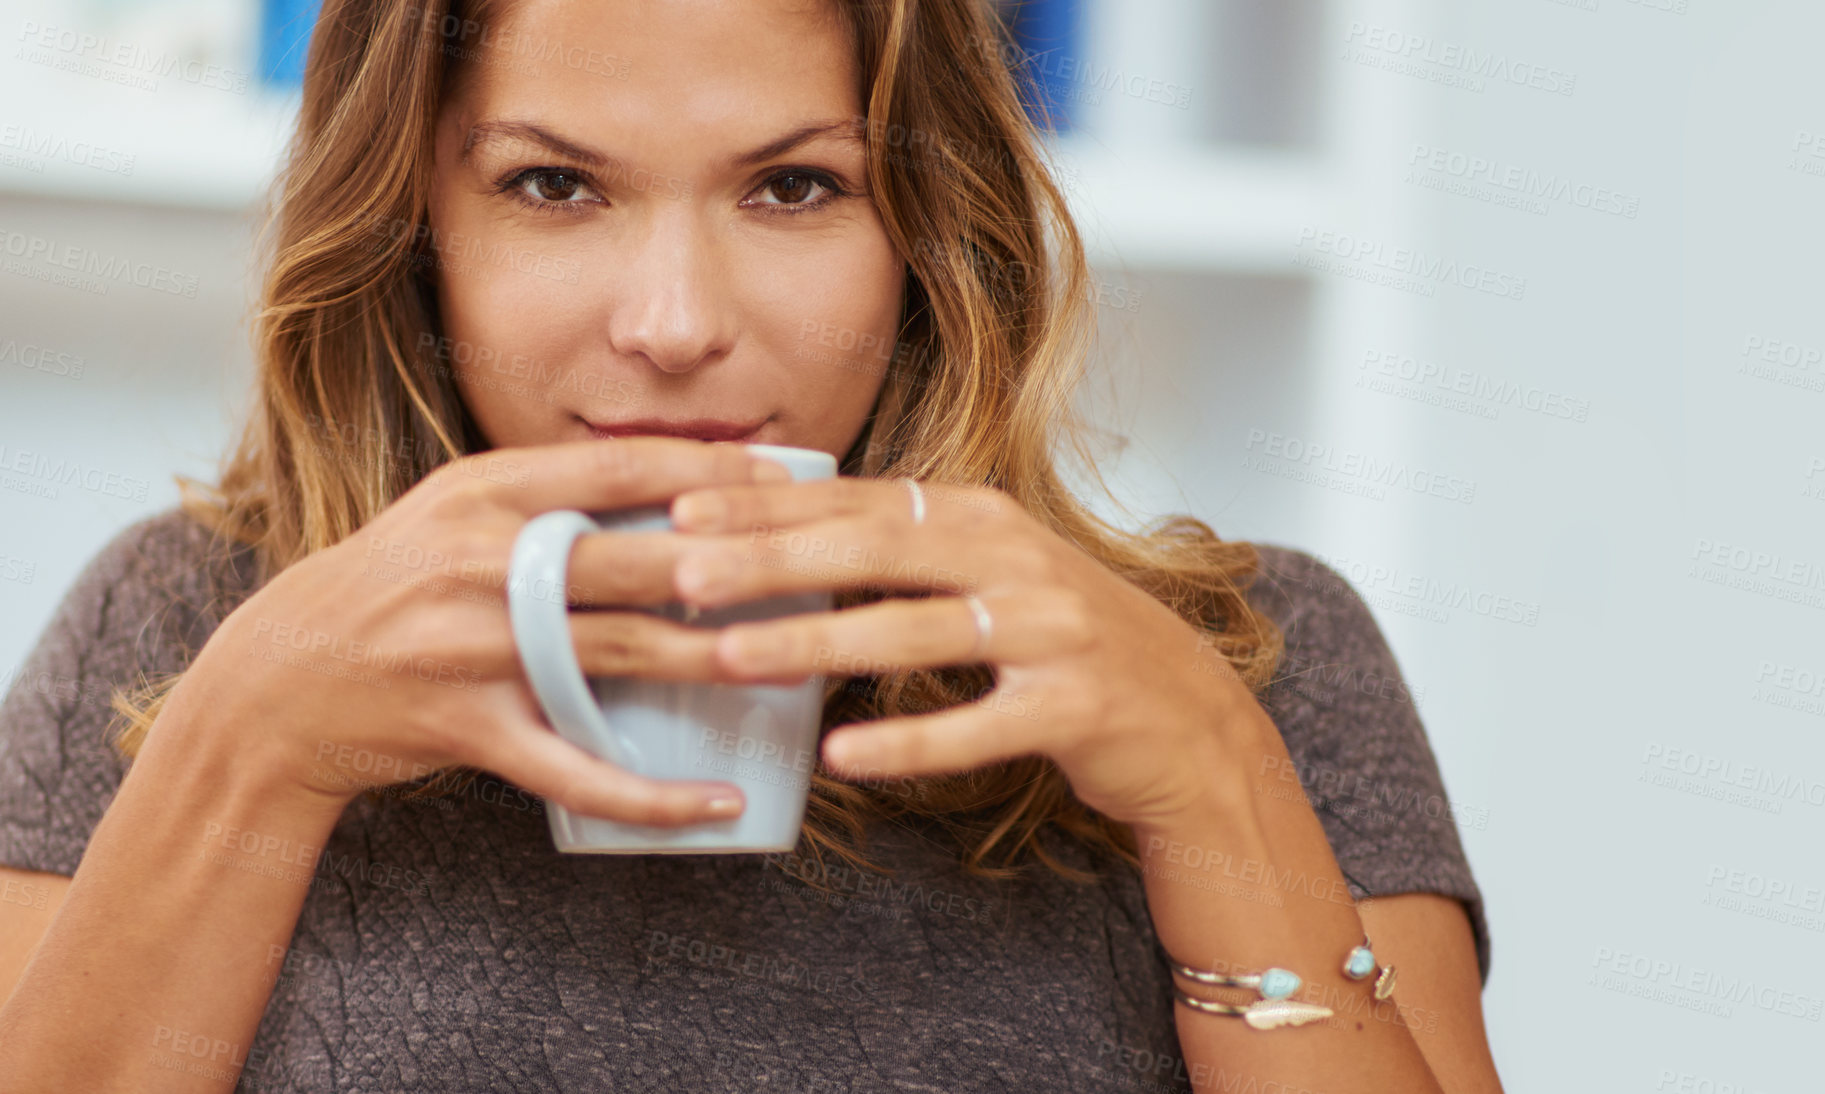 Buy stock photo Portrait of a young woman enjoying a warm beverage at home